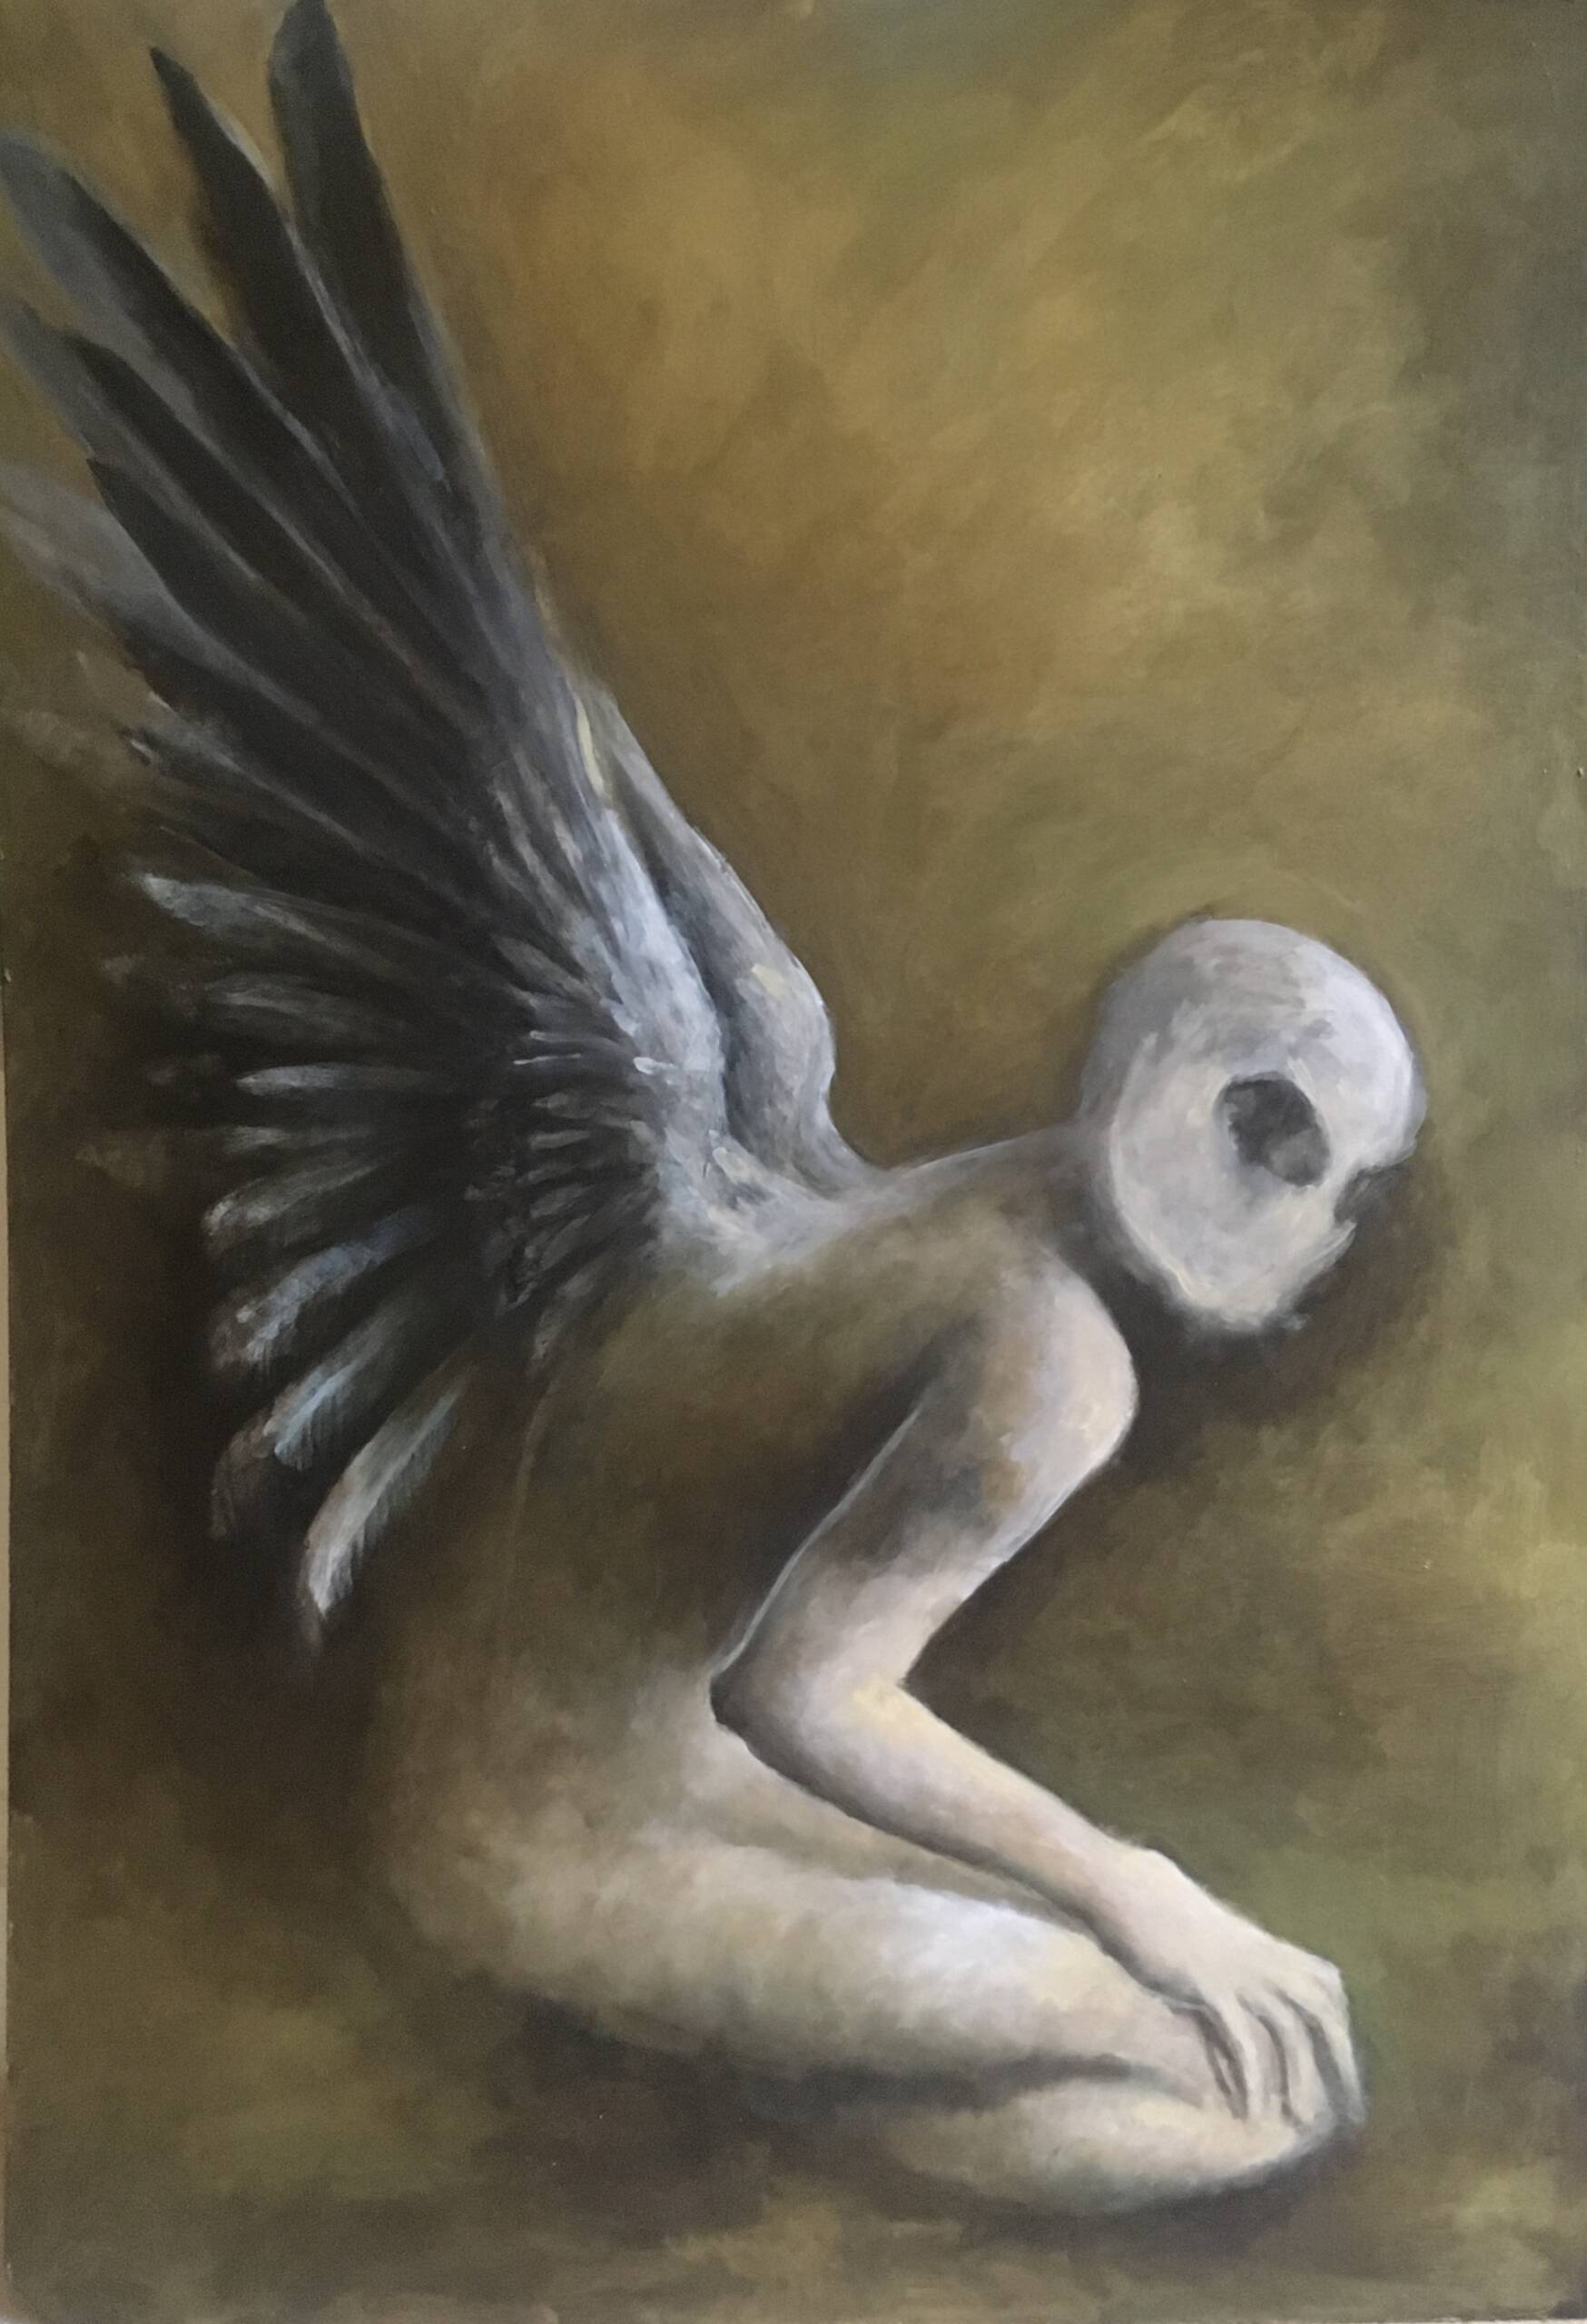 Fallen Angel by Virrgo, dark Paintings for sale, direct from the artist